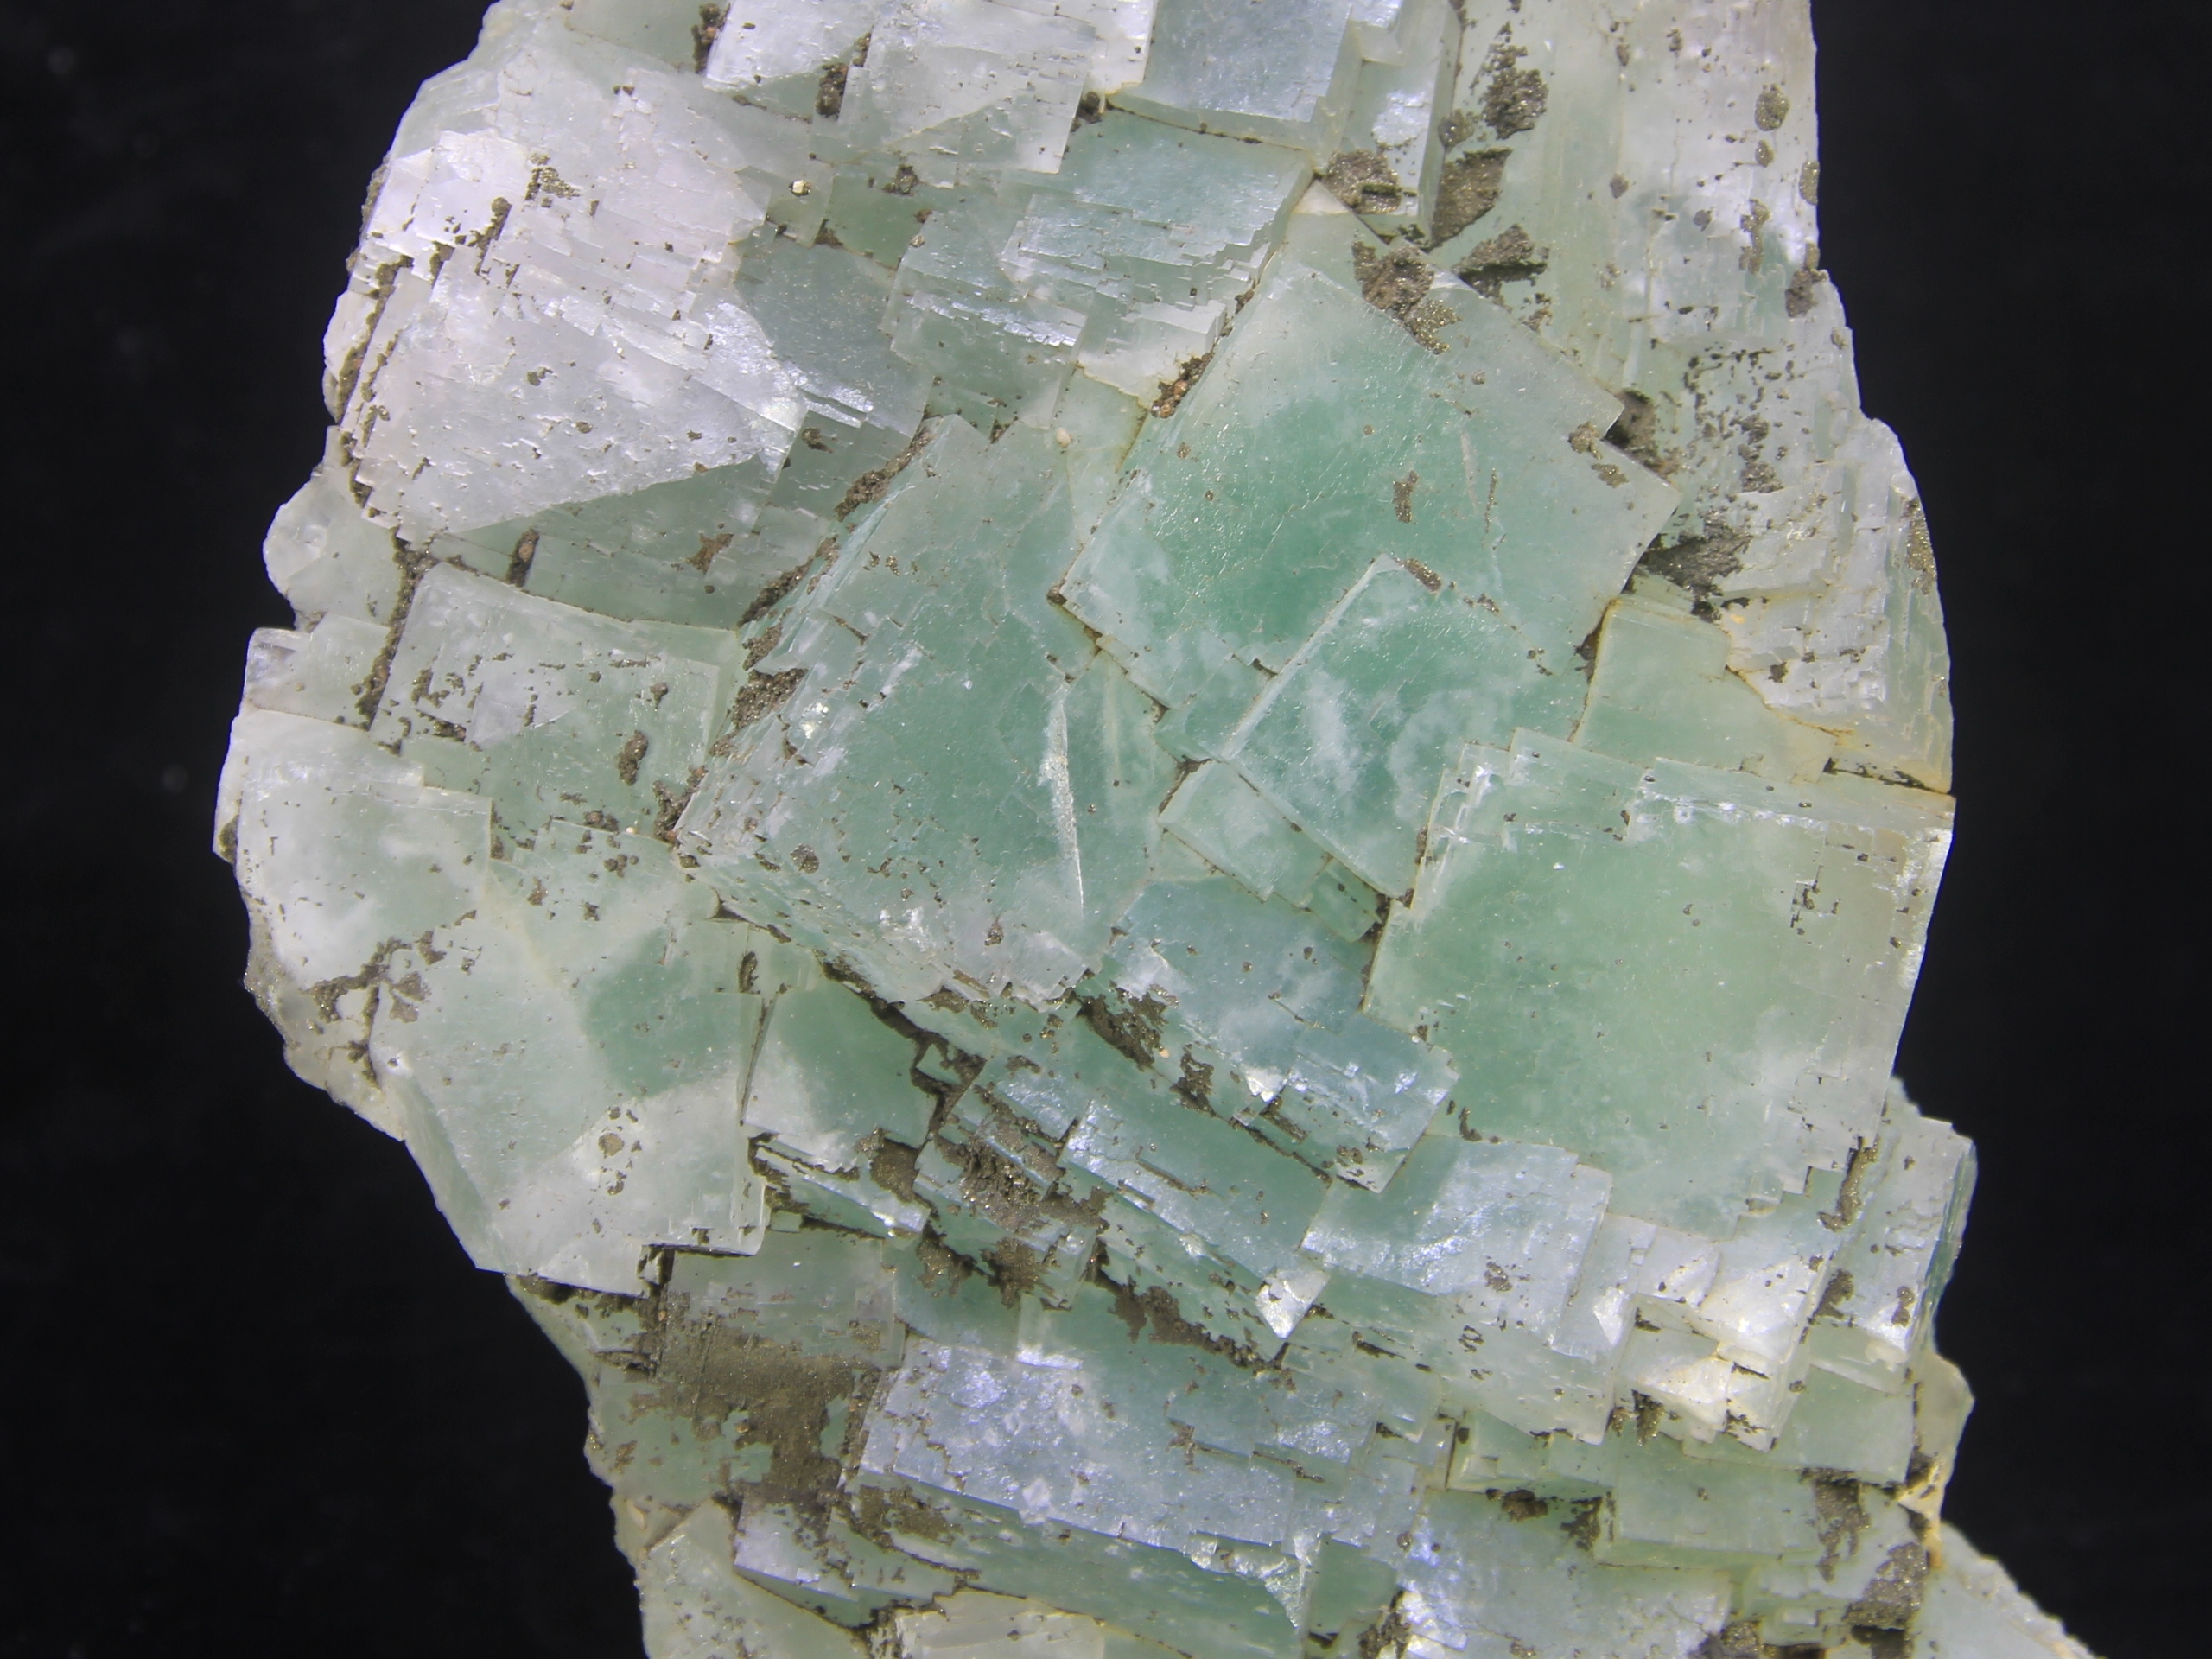 Green fluorite with some chalcopyrite